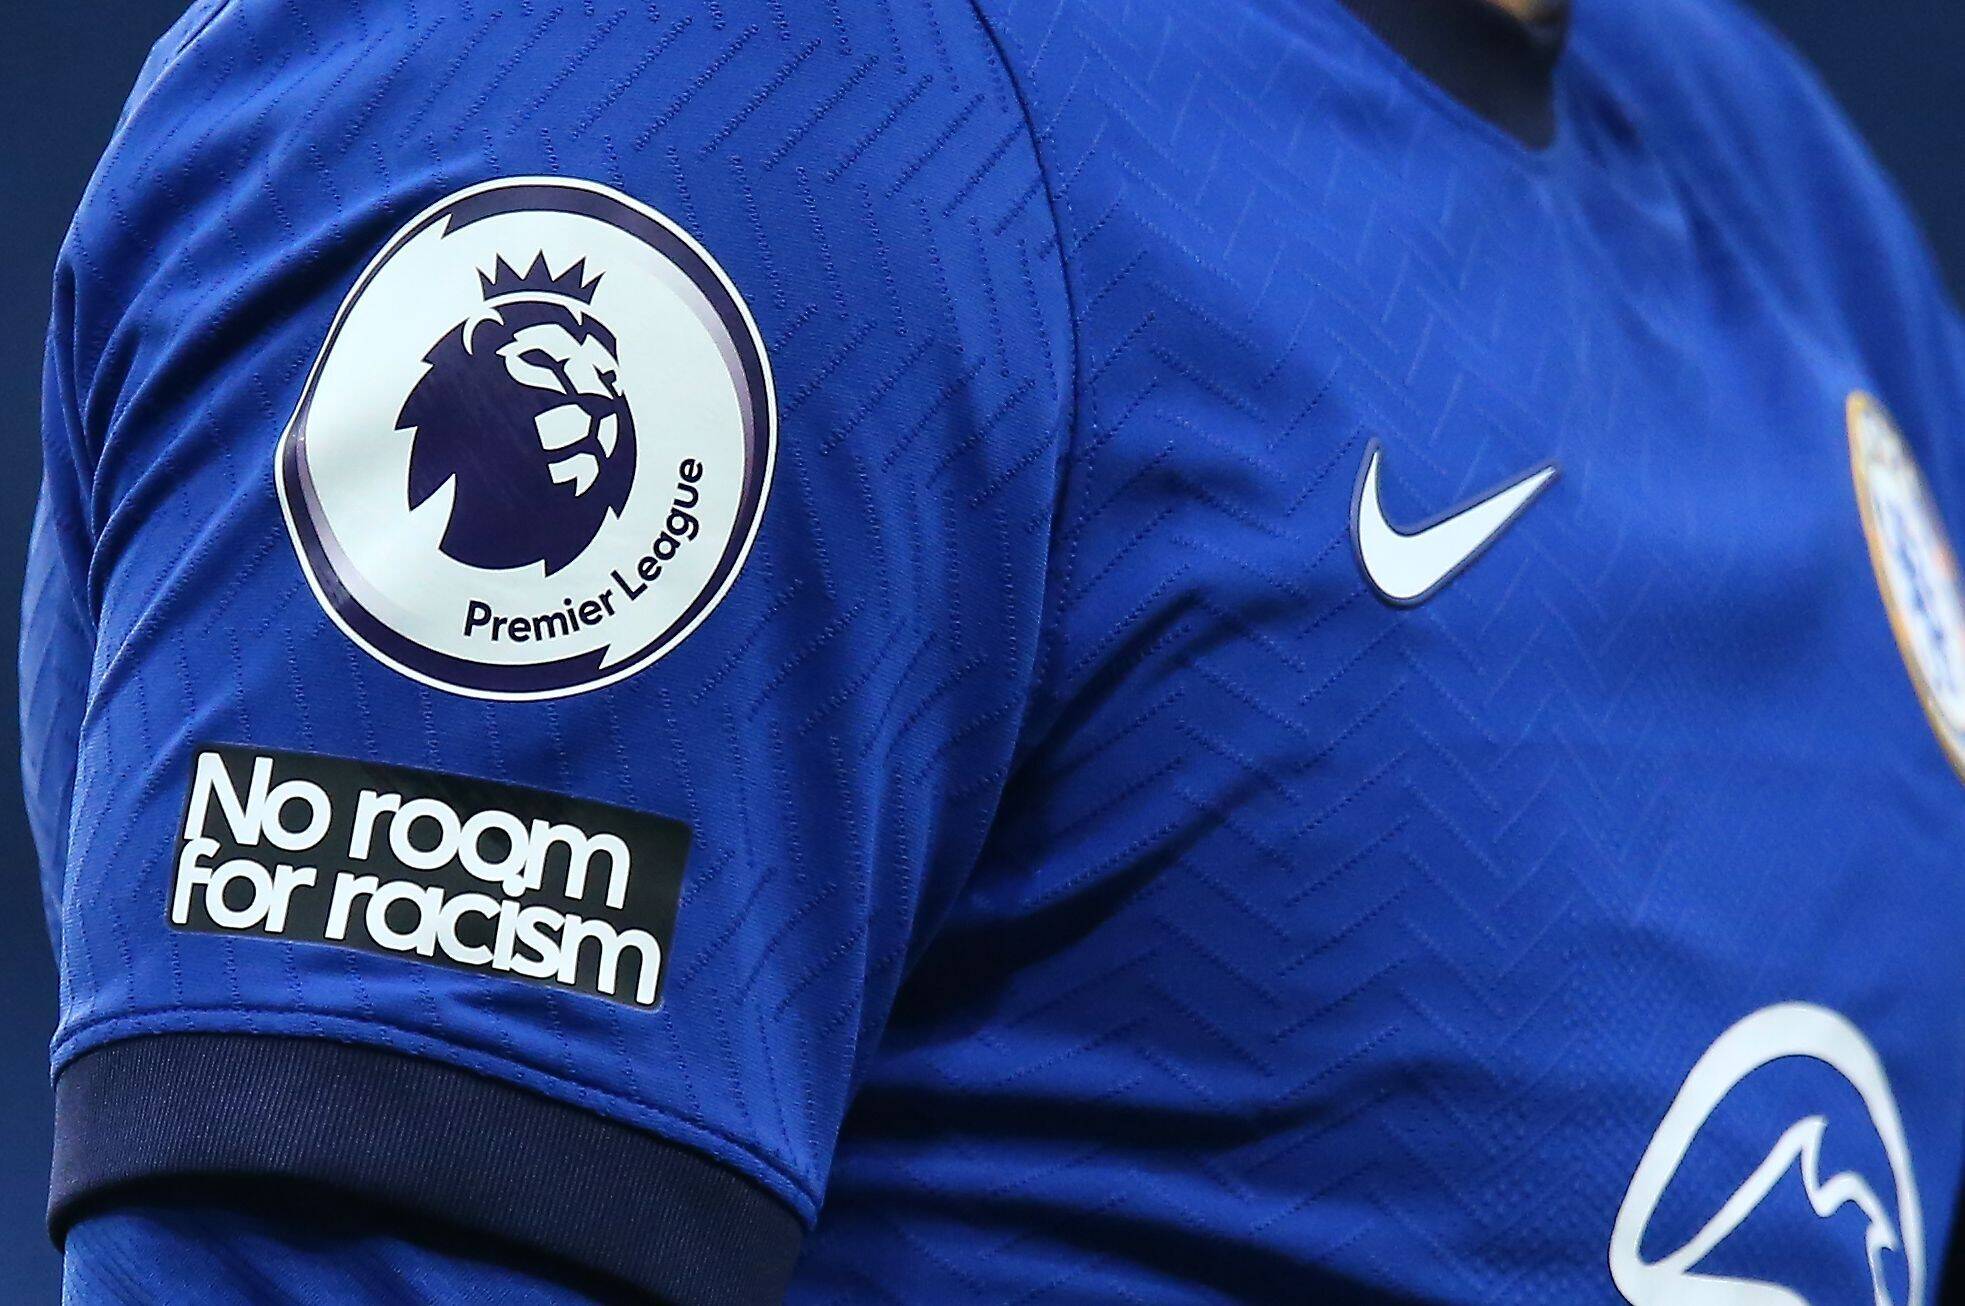 Chelsea, along with other Premier League clubs, have taken a stand against racism by boycotting social media.